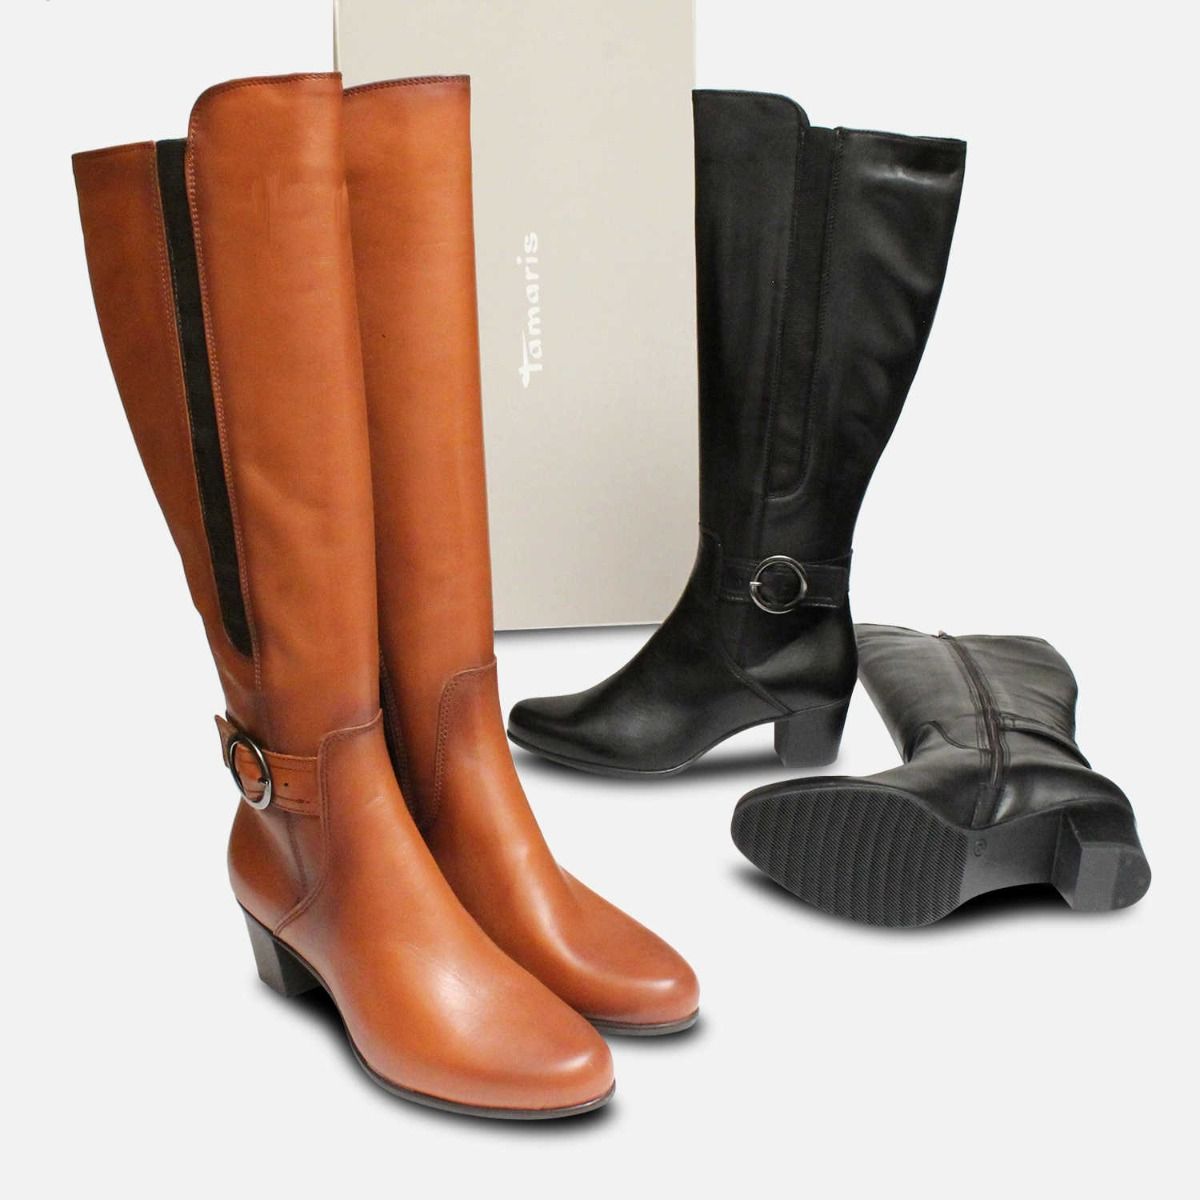 Leather Knee High Boots with